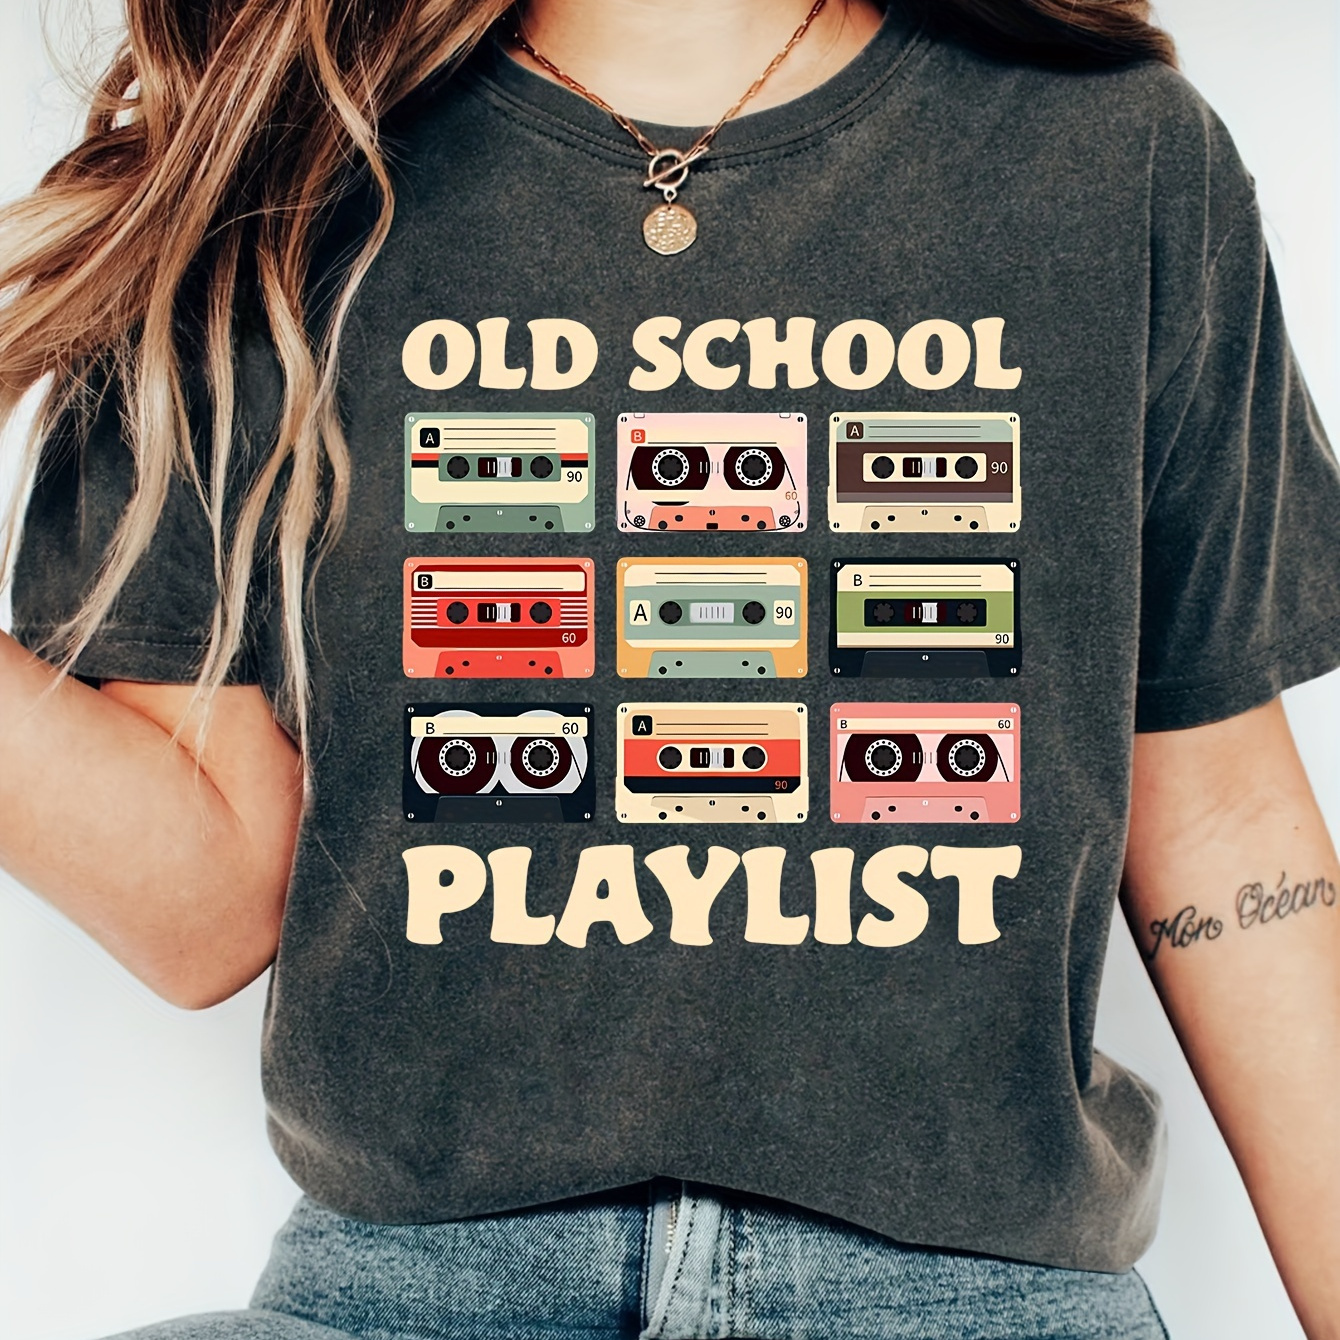 

Old School Playlist Print Crew Neck T-shirt, Short Sleeve Casual Top For Spring & Summer, Women's Clothing